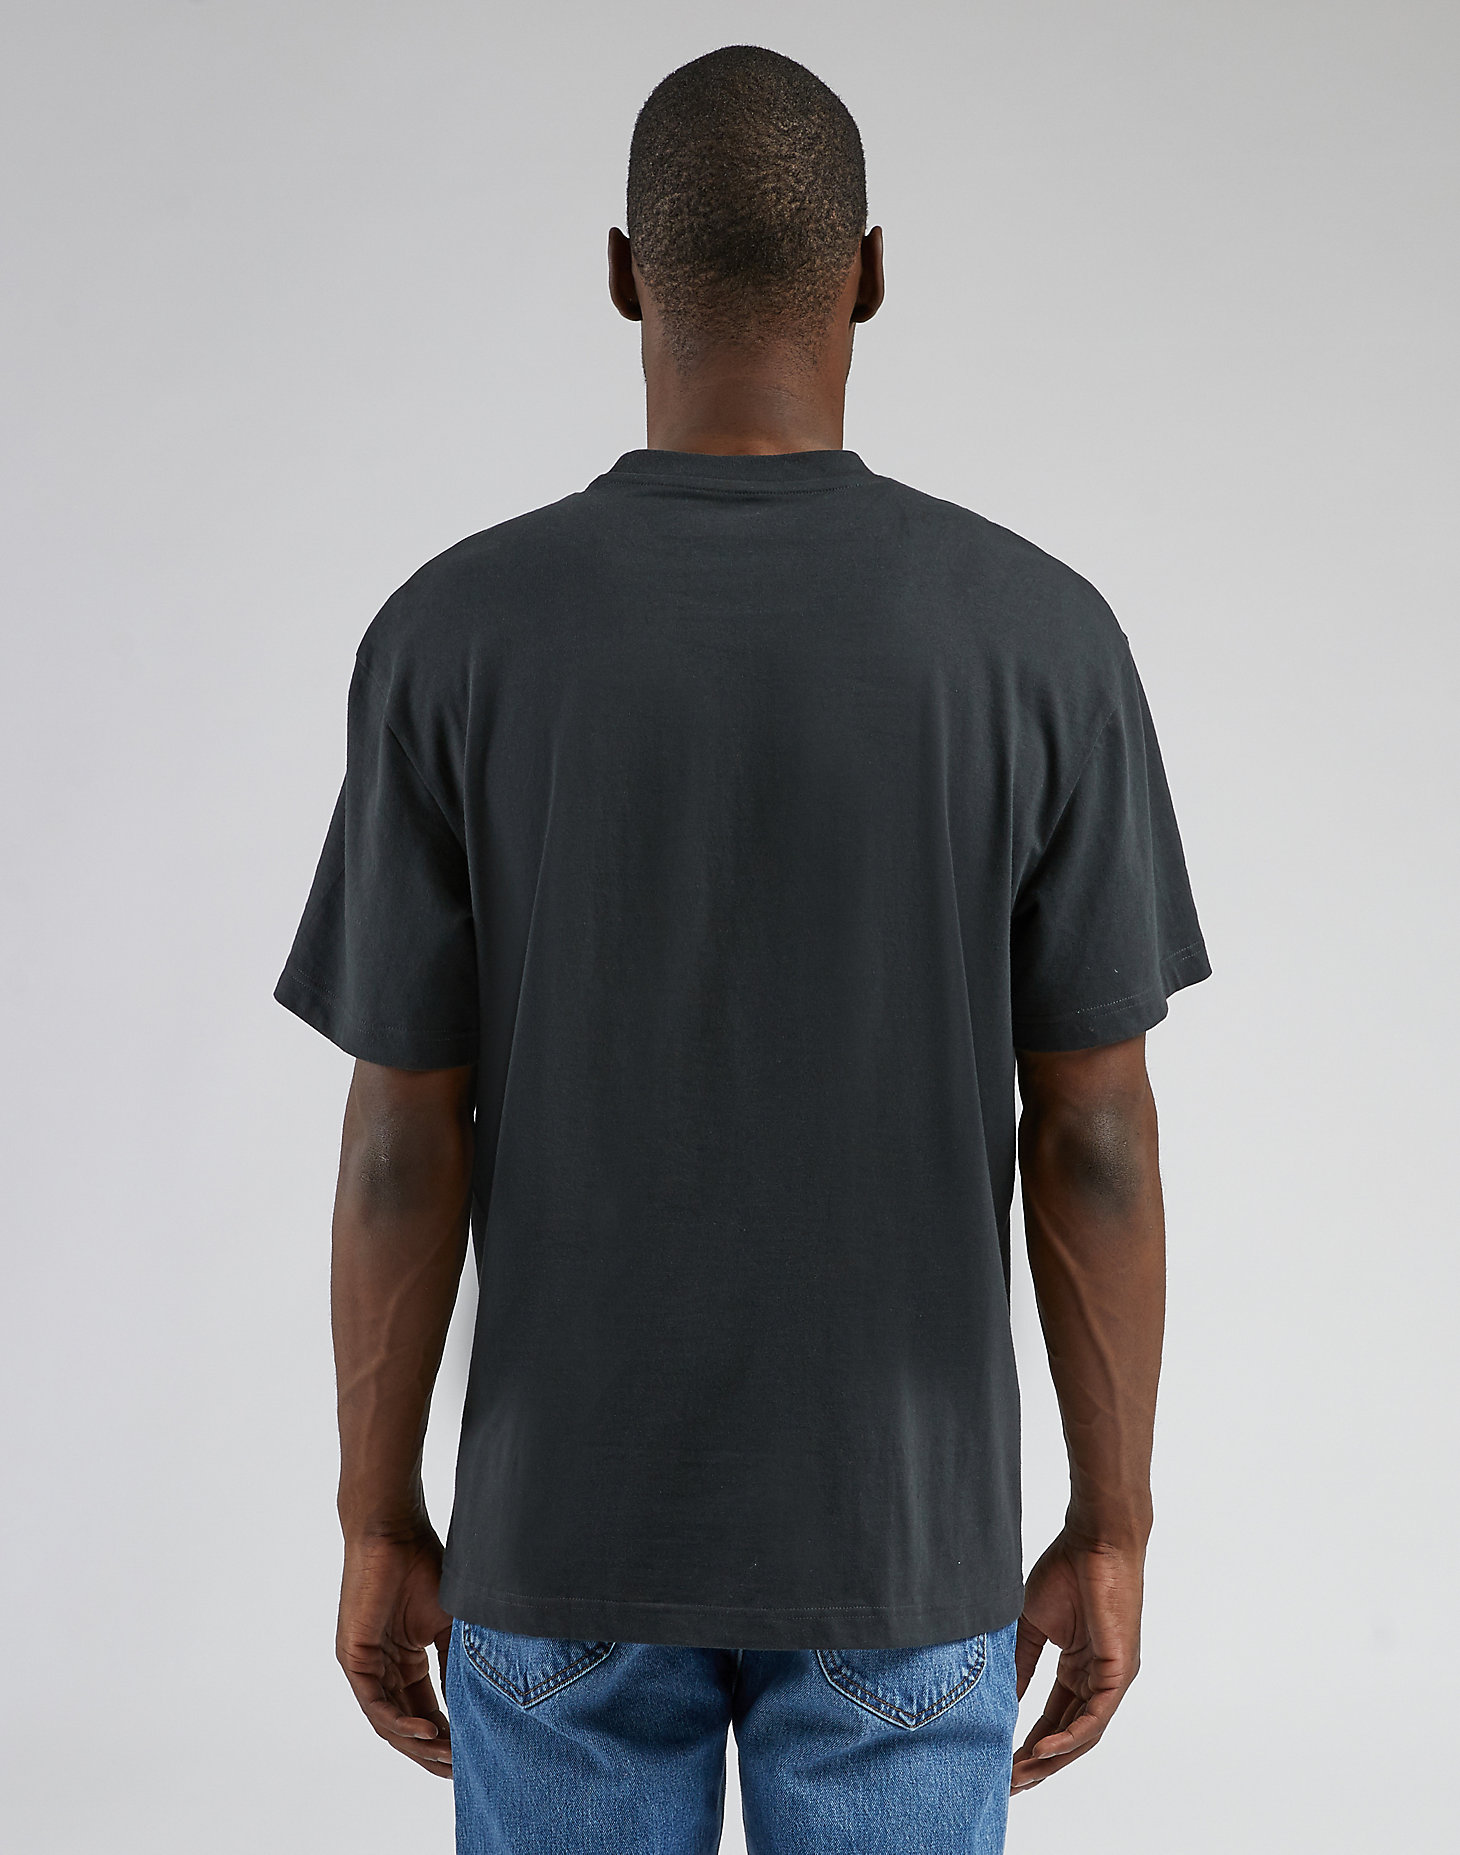 Short Sleeve Loose Tee in Washed Black alternative view 1